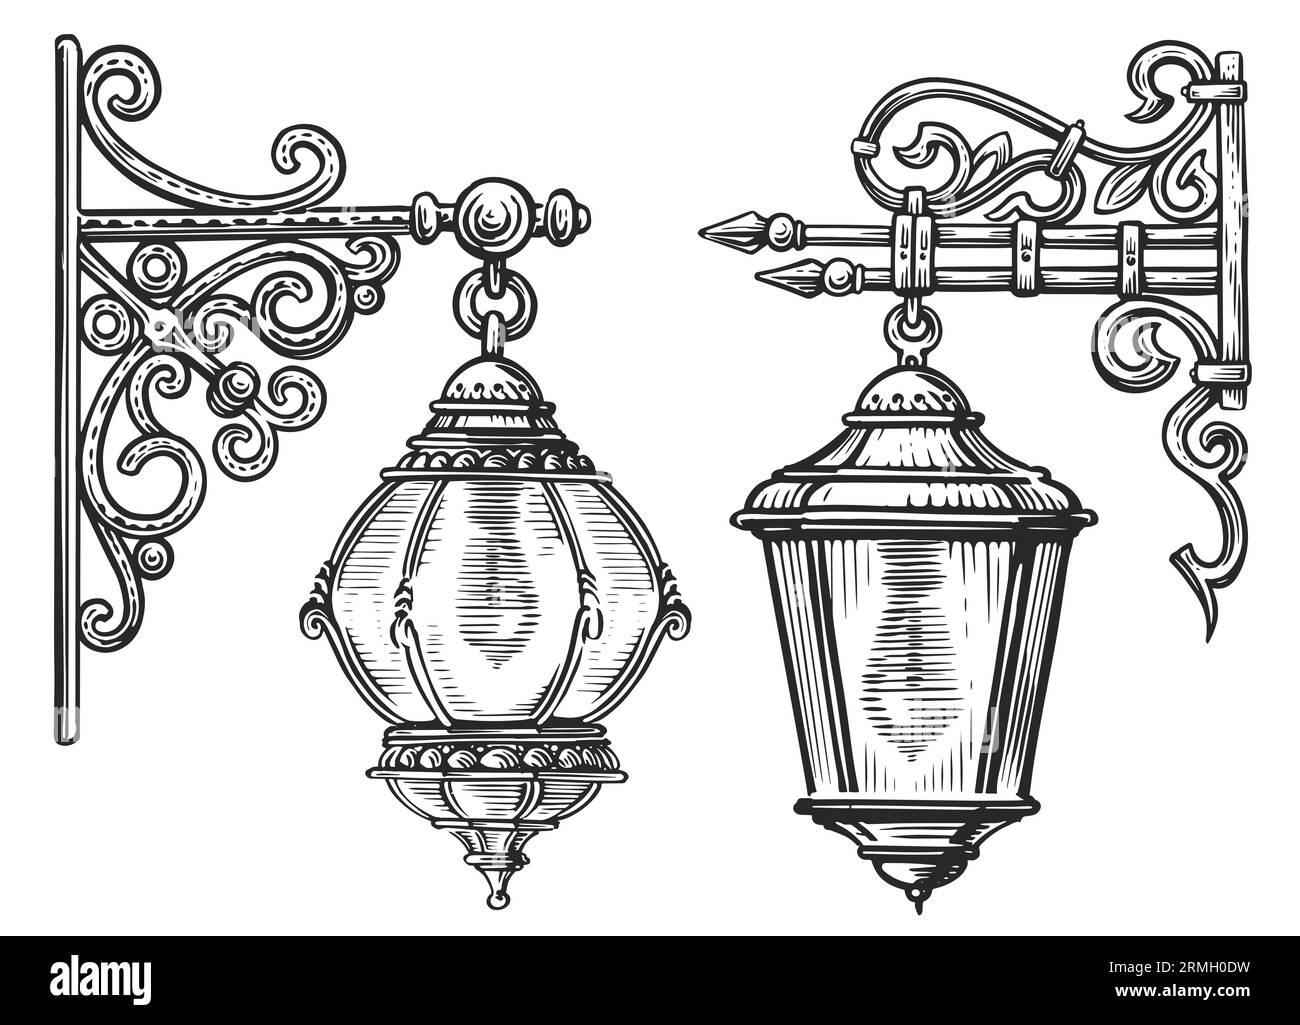 Wall old street lamp in engraving style. Vintage lantern sketch illustration Stock Photo